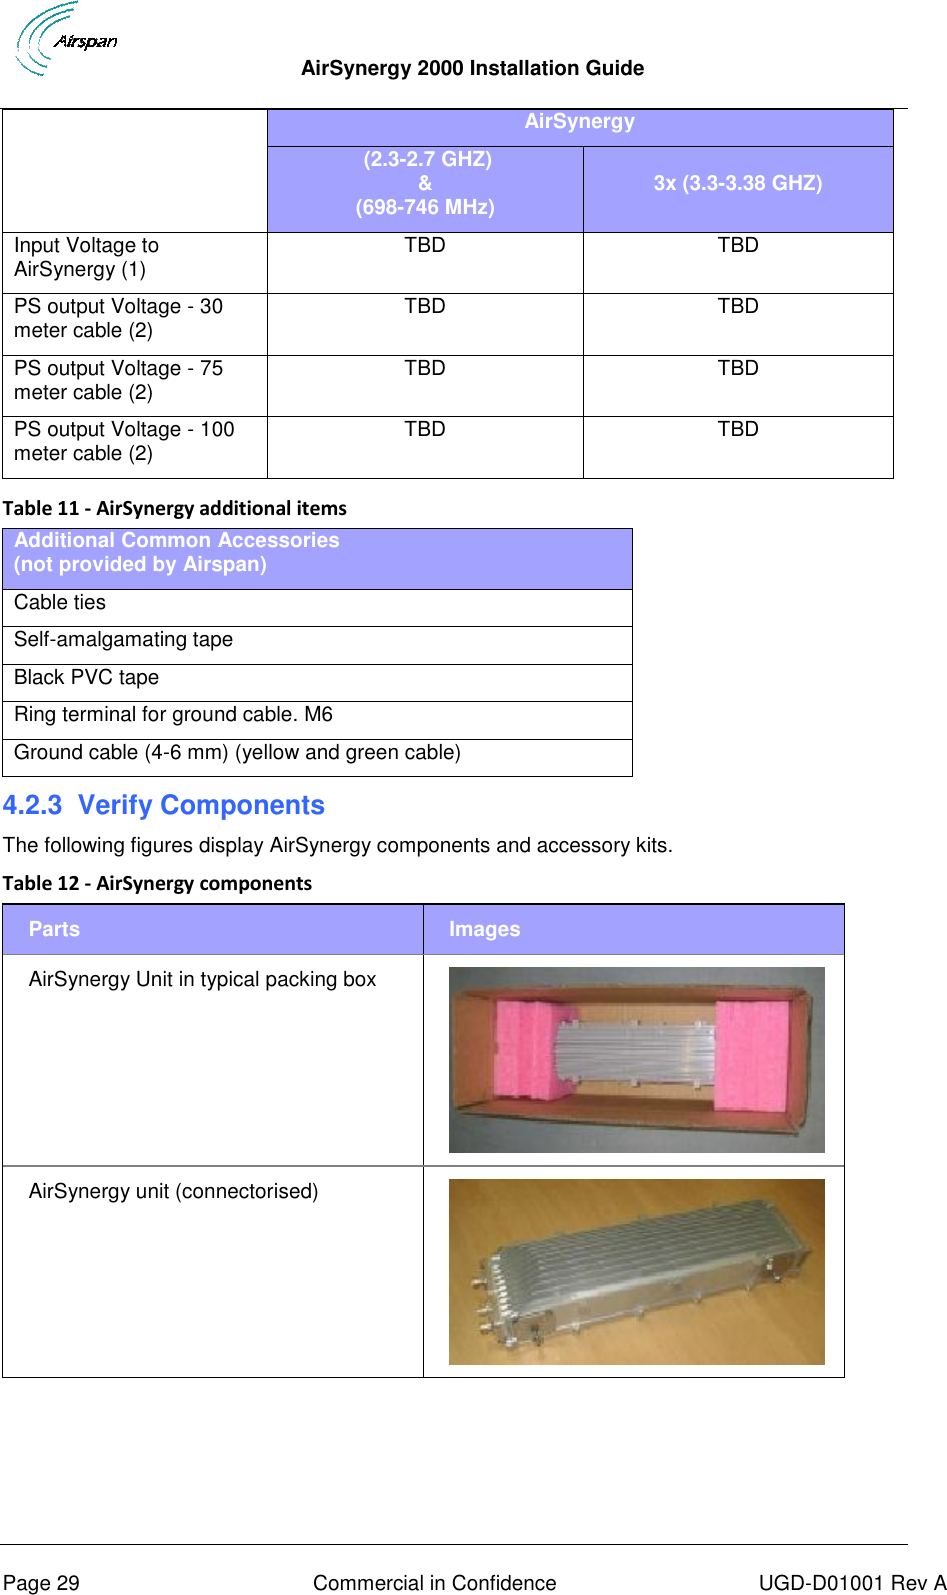  AirSynergy 2000 Installation Guide     Page 29  Commercial in Confidence  UGD-D01001 Rev A  AirSynergy  (2.3-2.7 GHZ) &amp; (698-746 MHz) 3x (3.3-3.38 GHZ) Input Voltage to AirSynergy (1) TBD TBD PS output Voltage - 30 meter cable (2) TBD TBD PS output Voltage - 75 meter cable (2) TBD TBD PS output Voltage - 100 meter cable (2) TBD TBD  Table 11 - AirSynergy additional items Additional Common Accessories  (not provided by Airspan) Cable ties Self-amalgamating tape Black PVC tape Ring terminal for ground cable. M6 Ground cable (4-6 mm) (yellow and green cable) 4.2.3  Verify Components The following figures display AirSynergy components and accessory kits. Table 12 - AirSynergy components Parts Images AirSynergy Unit in typical packing box  AirSynergy unit (connectorised)  